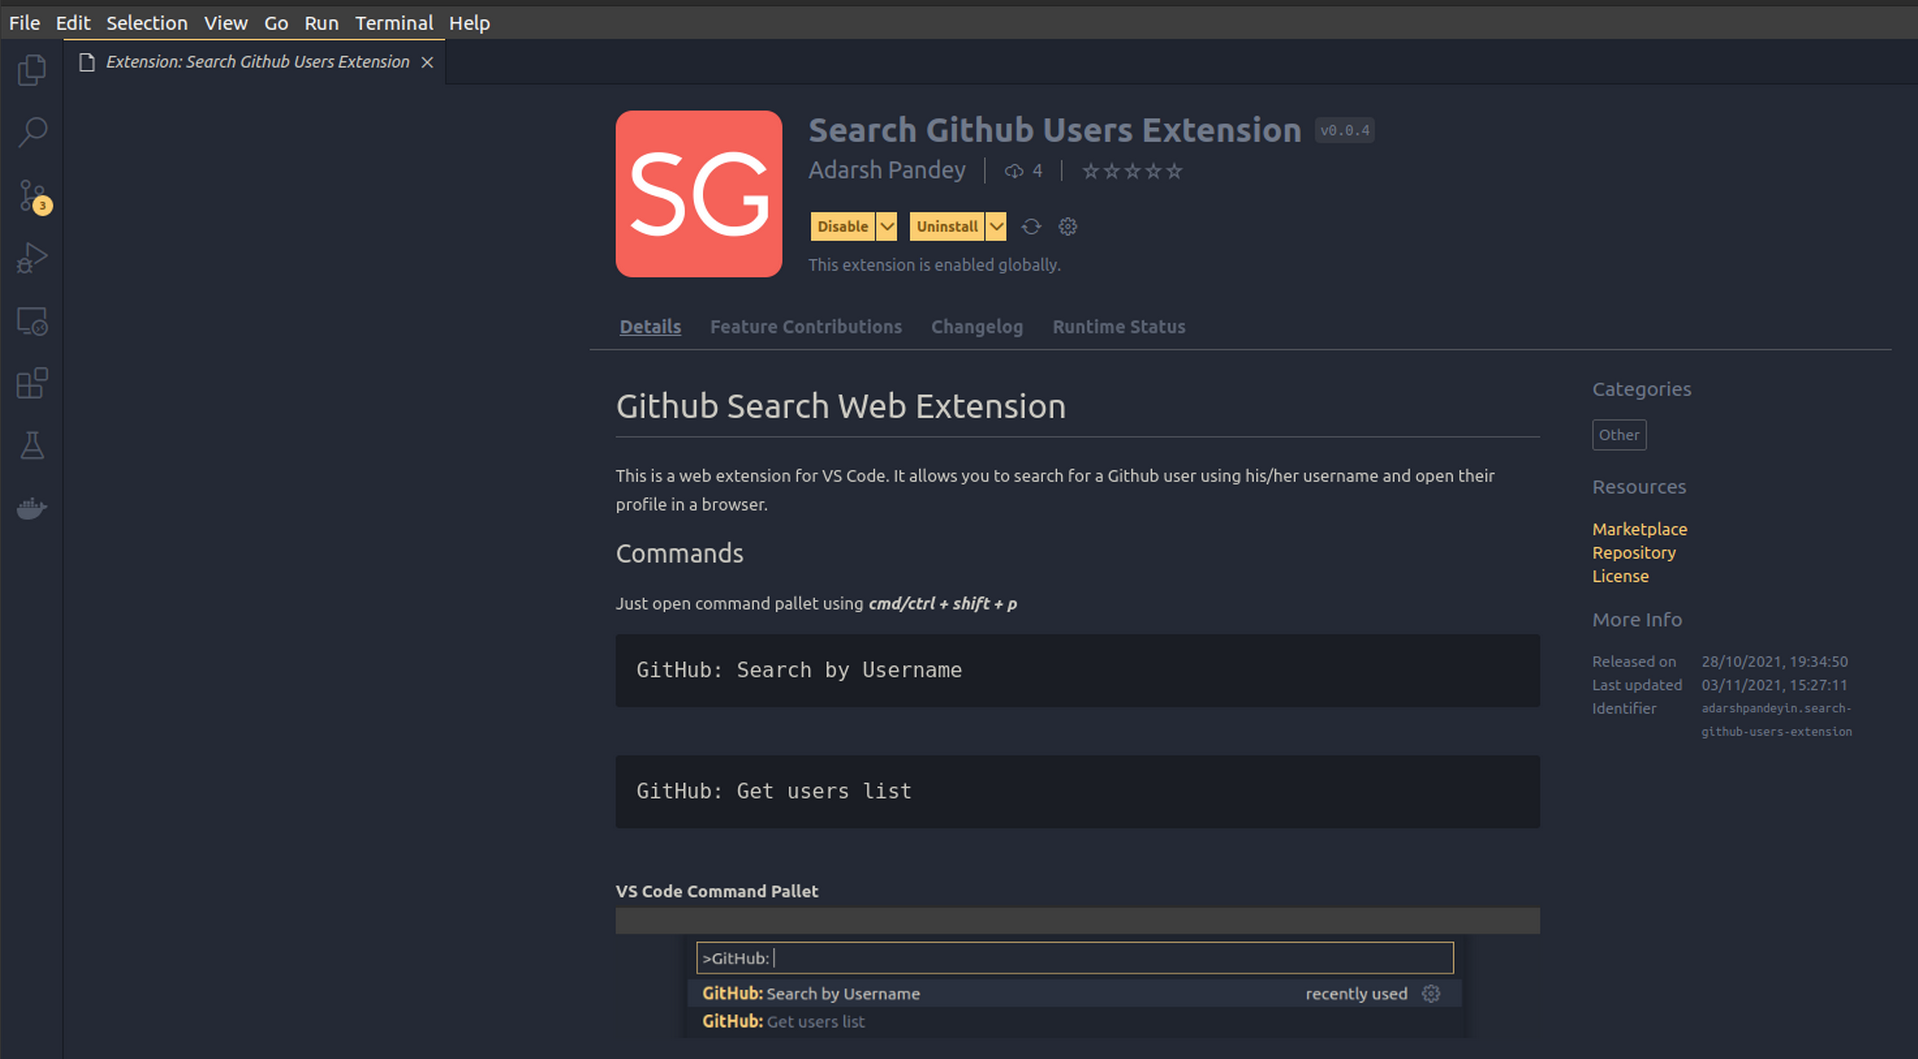 Search Github Users VS Code Web Extension snapshot